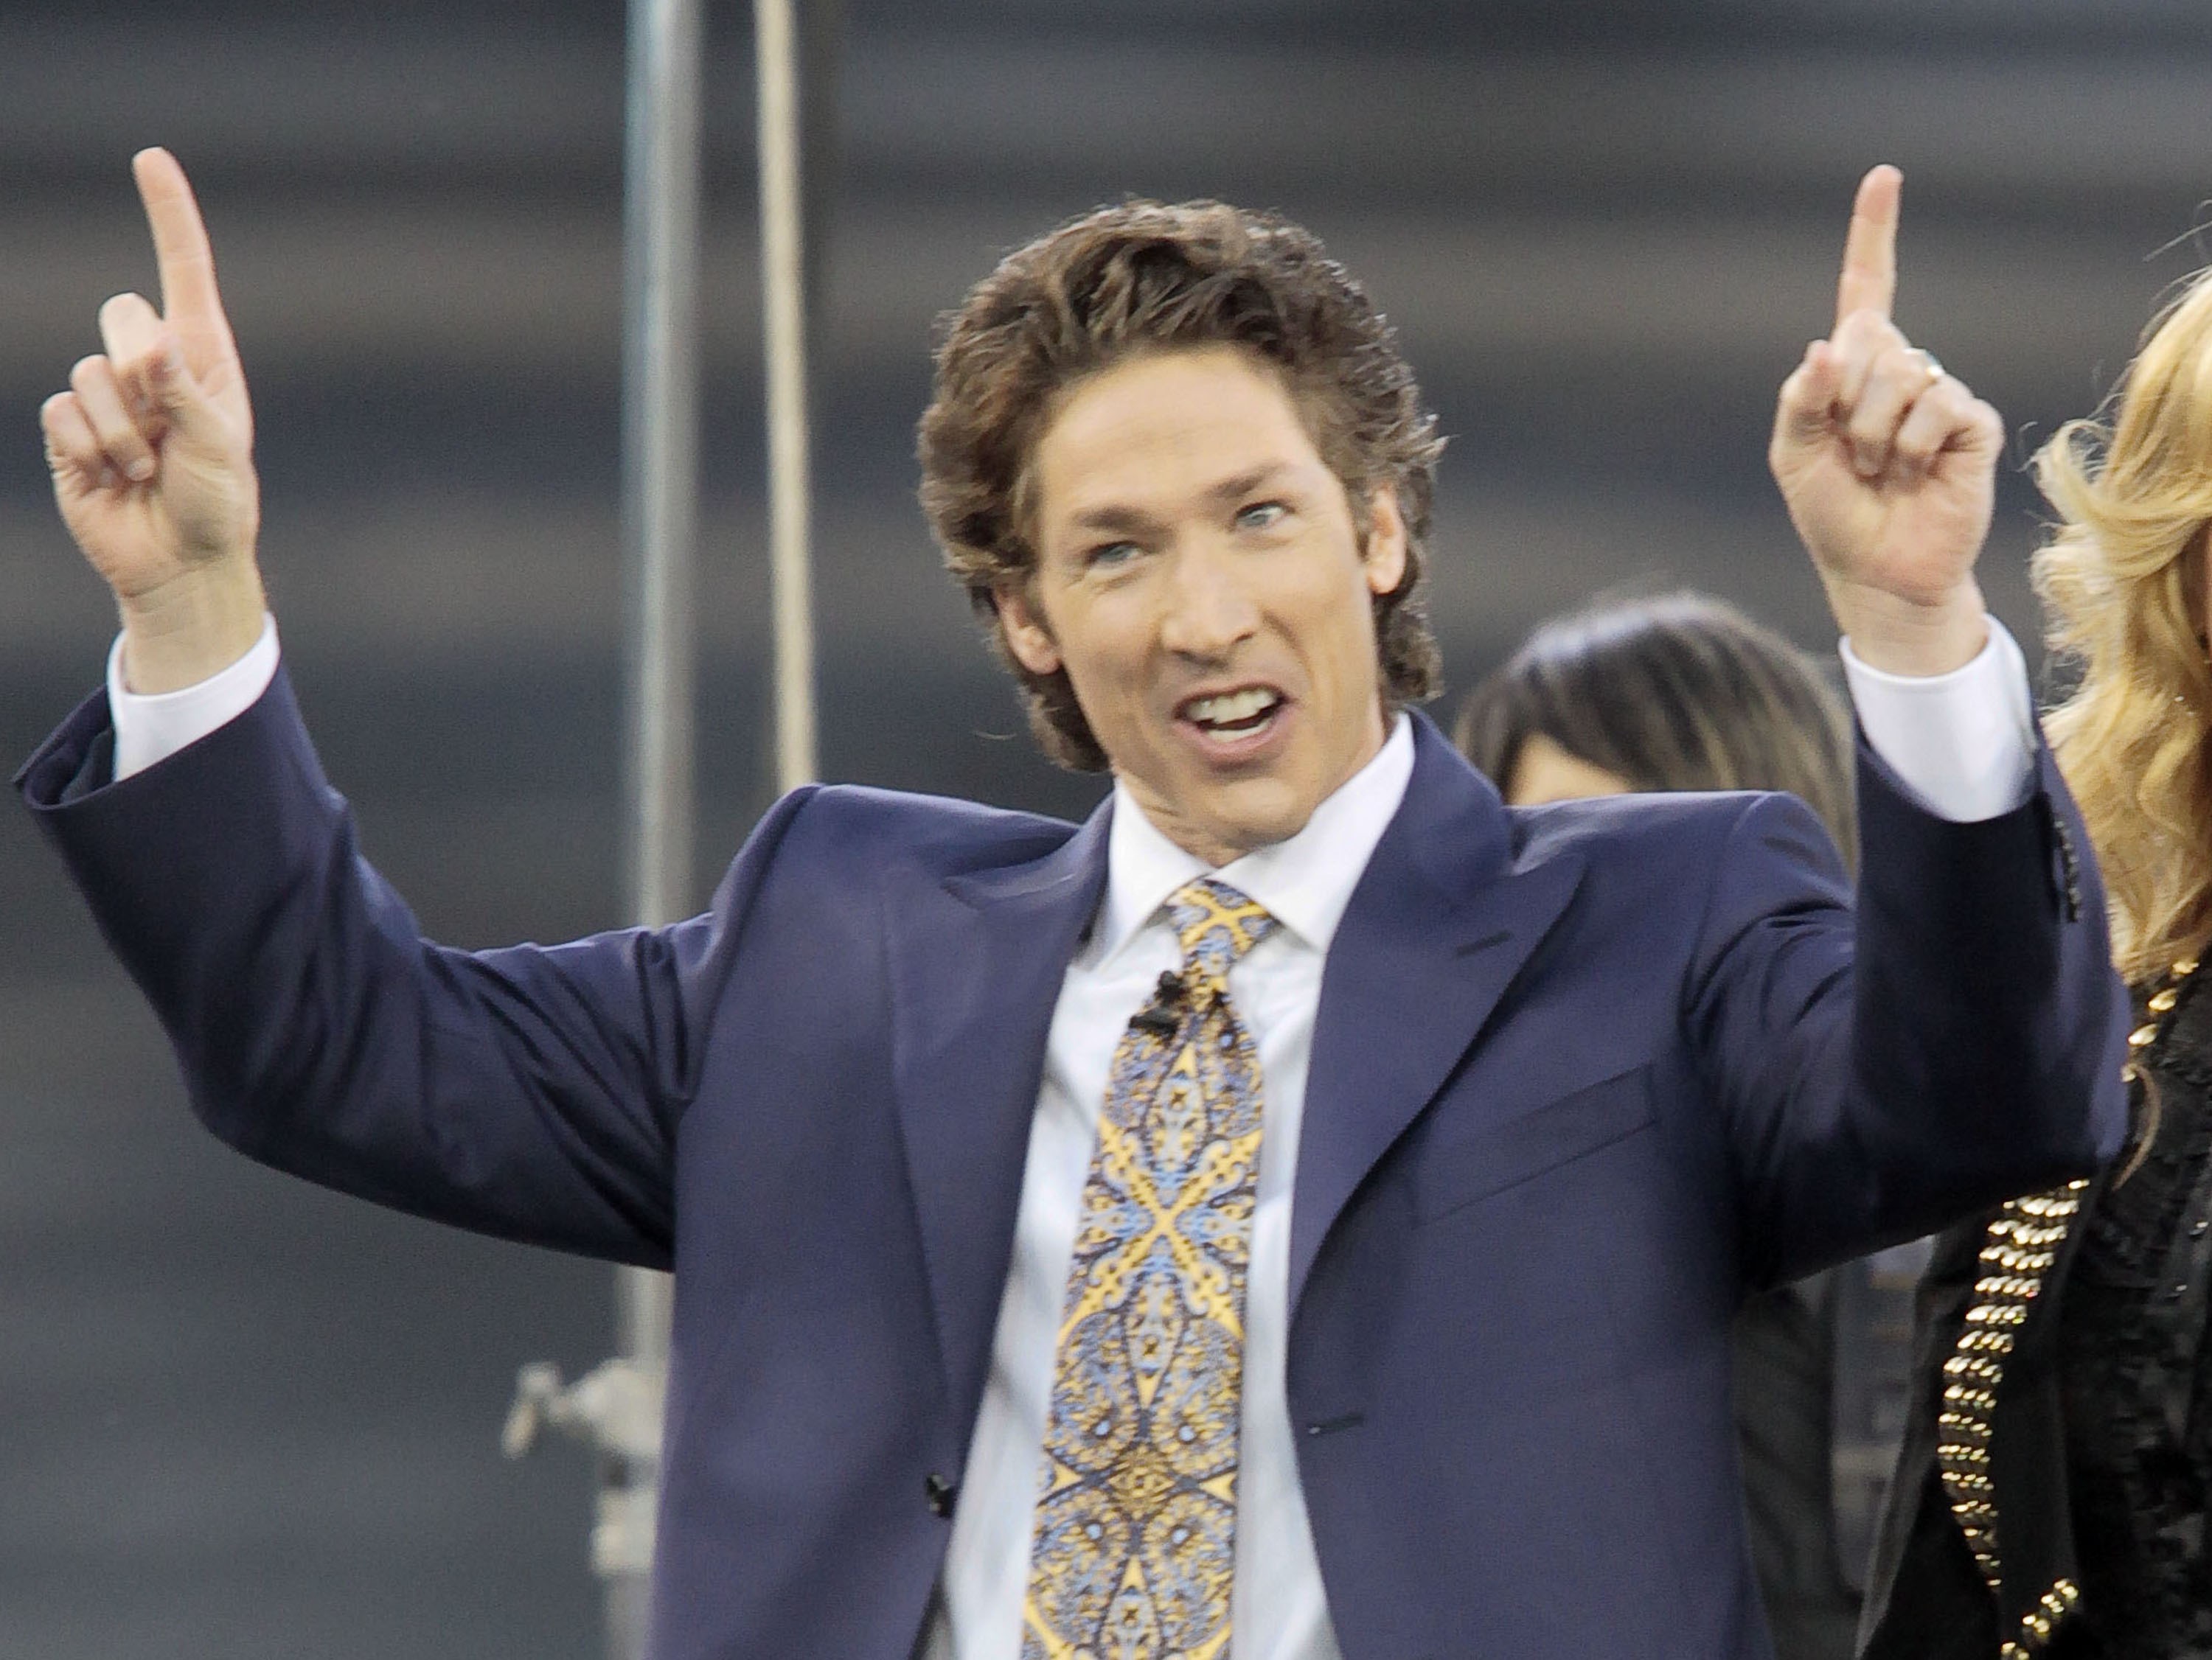 Millionaire ‘prosperity preacher’ Joel Osteen has come under fire for being slow to help flood victims at his Lakewood Church